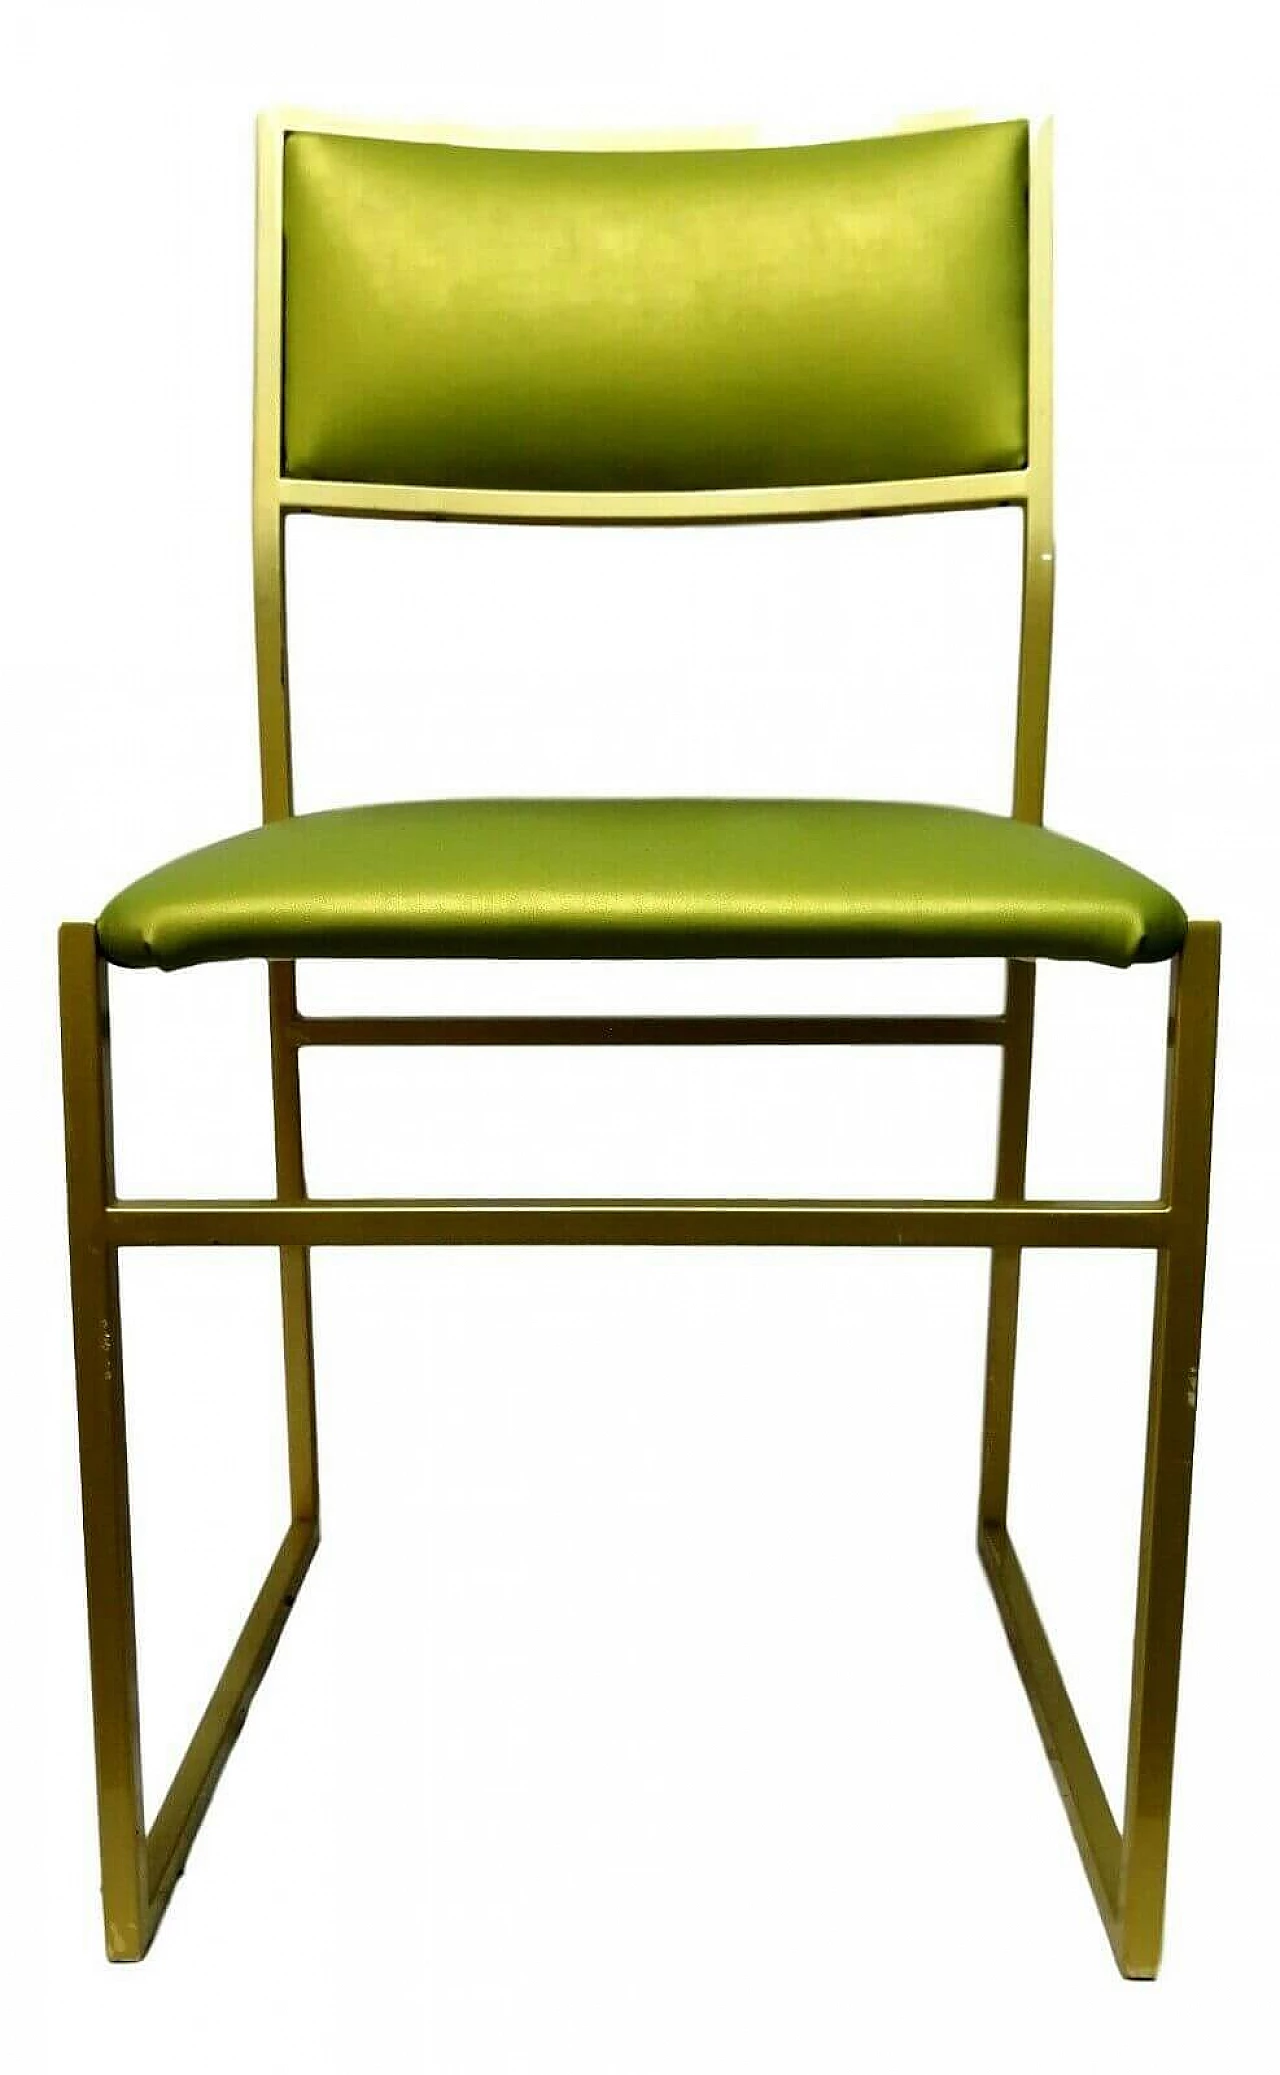 Metal chair and seat green, 70's 1166234